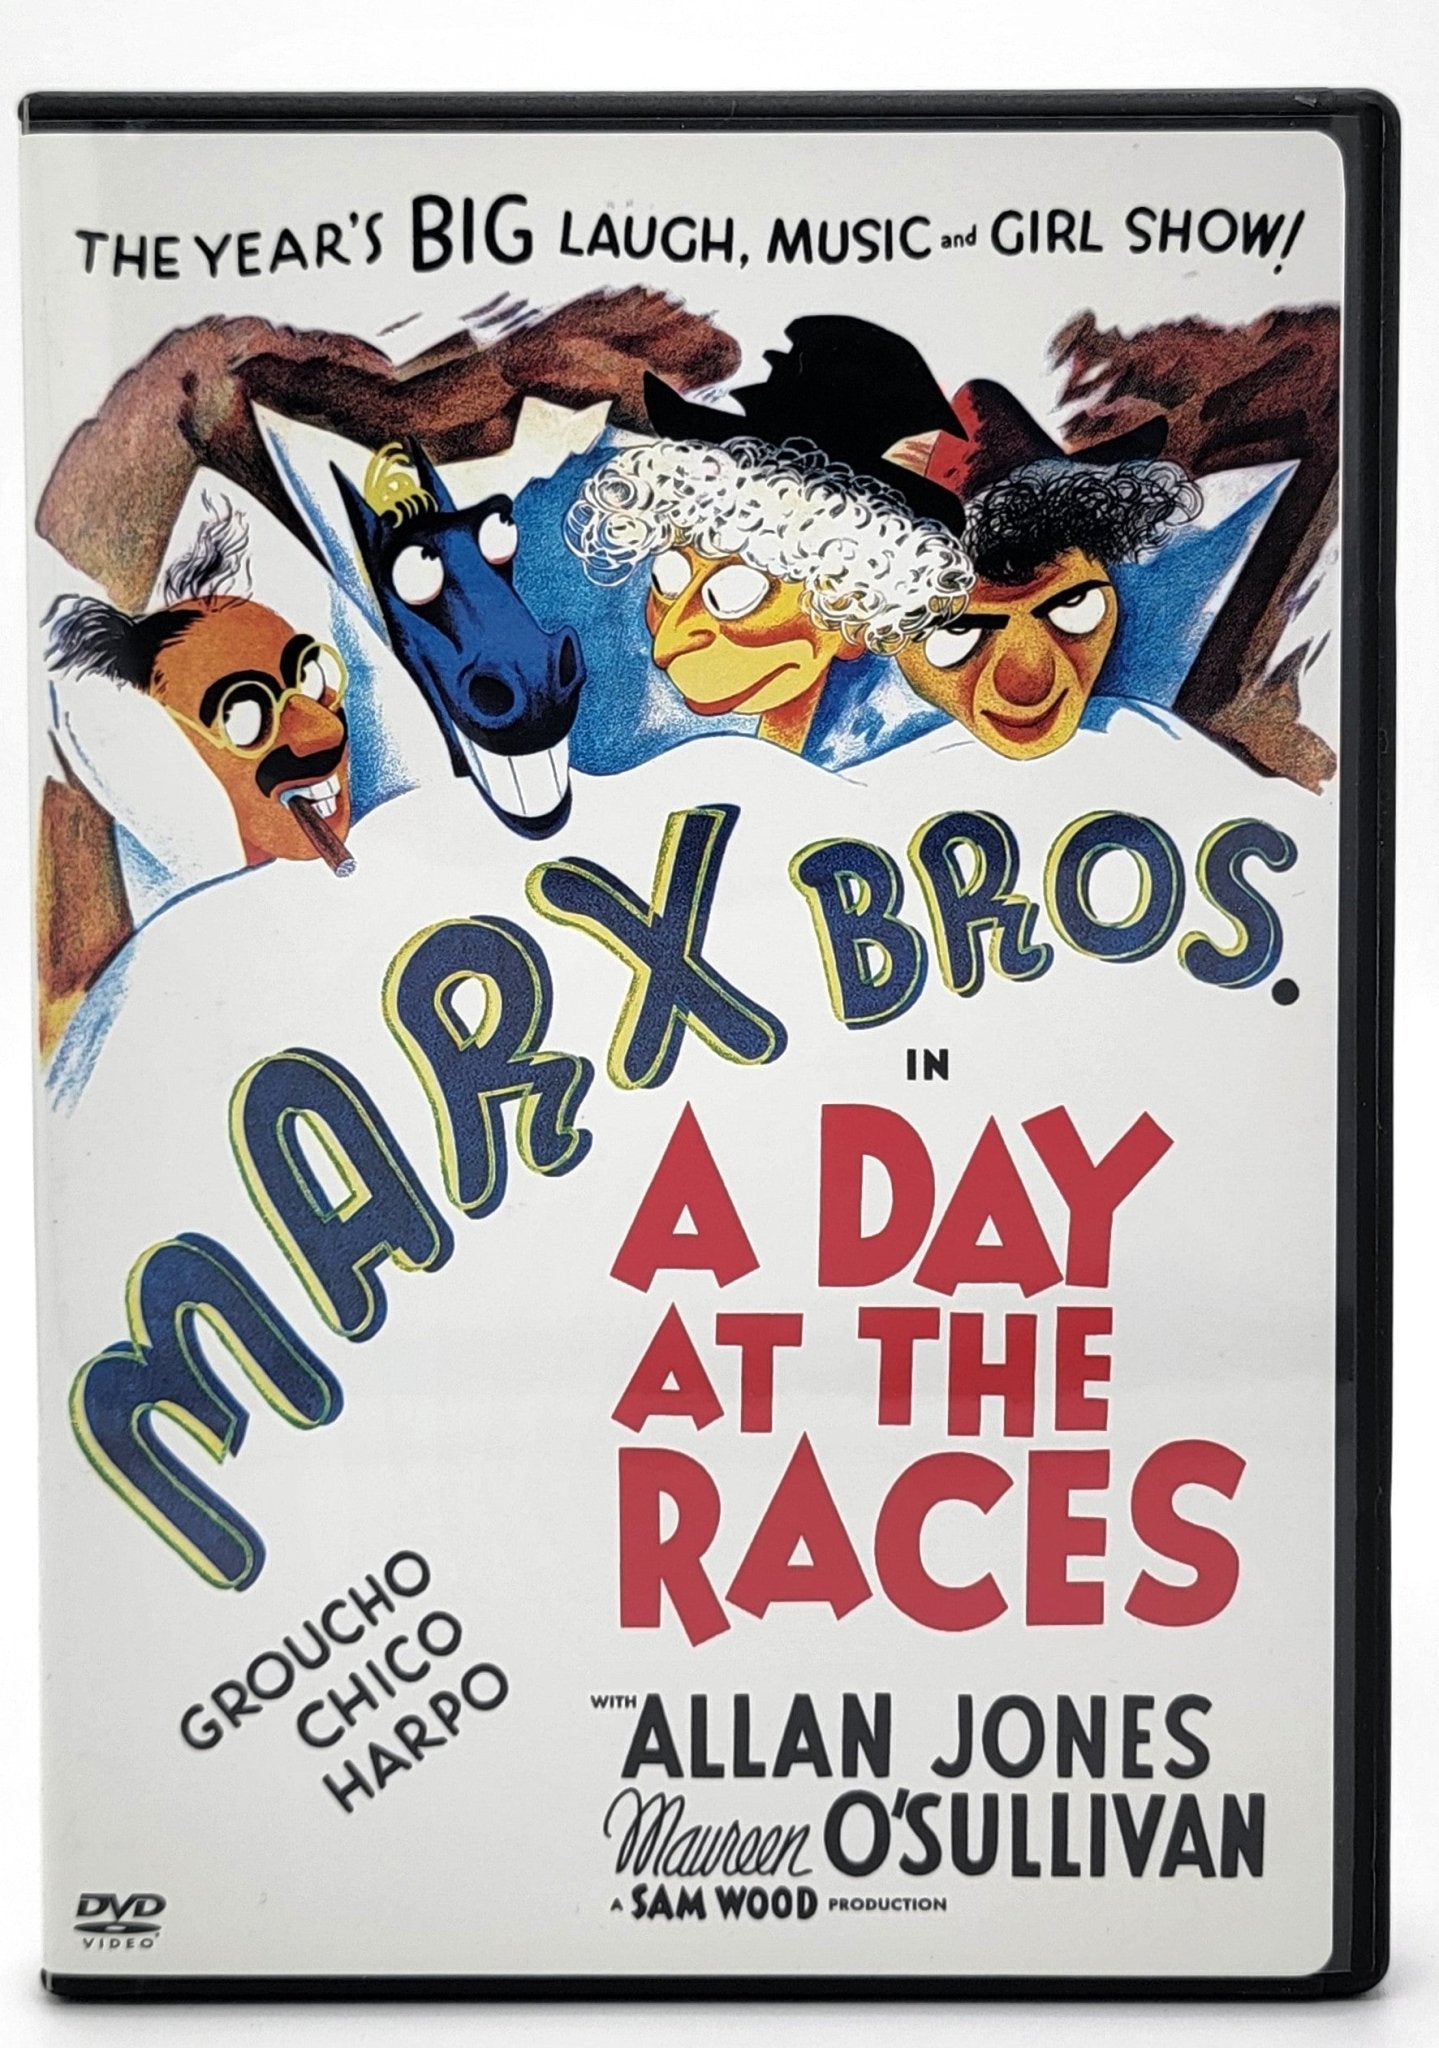 Warner Bothers - The Marx Brothers Collection | DVD | 5 Discs set - 7 Movies - DVD - Steady Bunny Shop